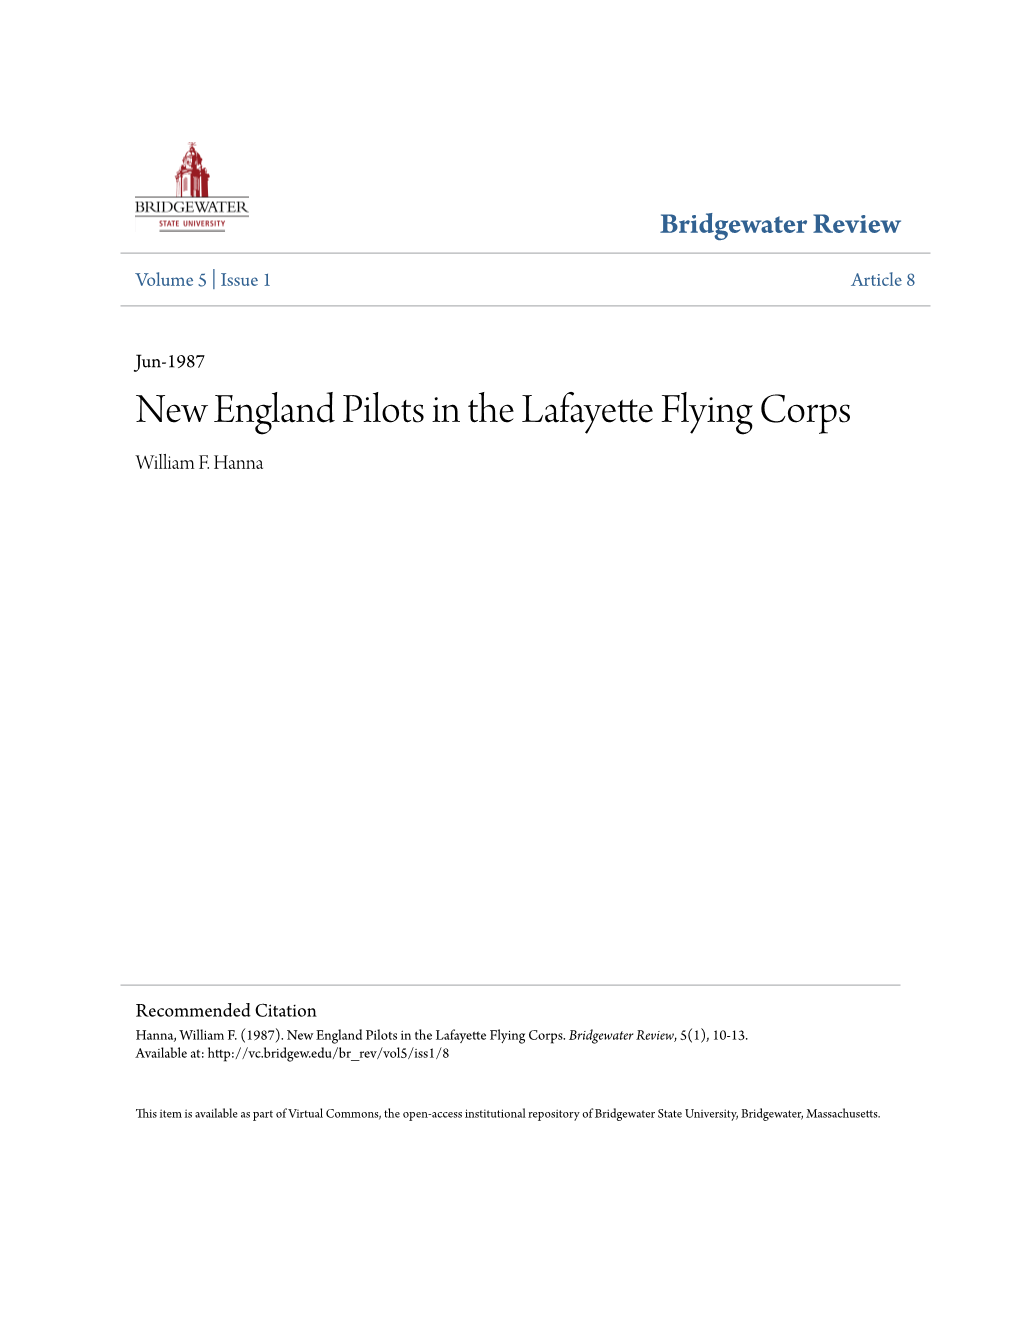 New England Pilots in the Lafayette Flying Corps William F